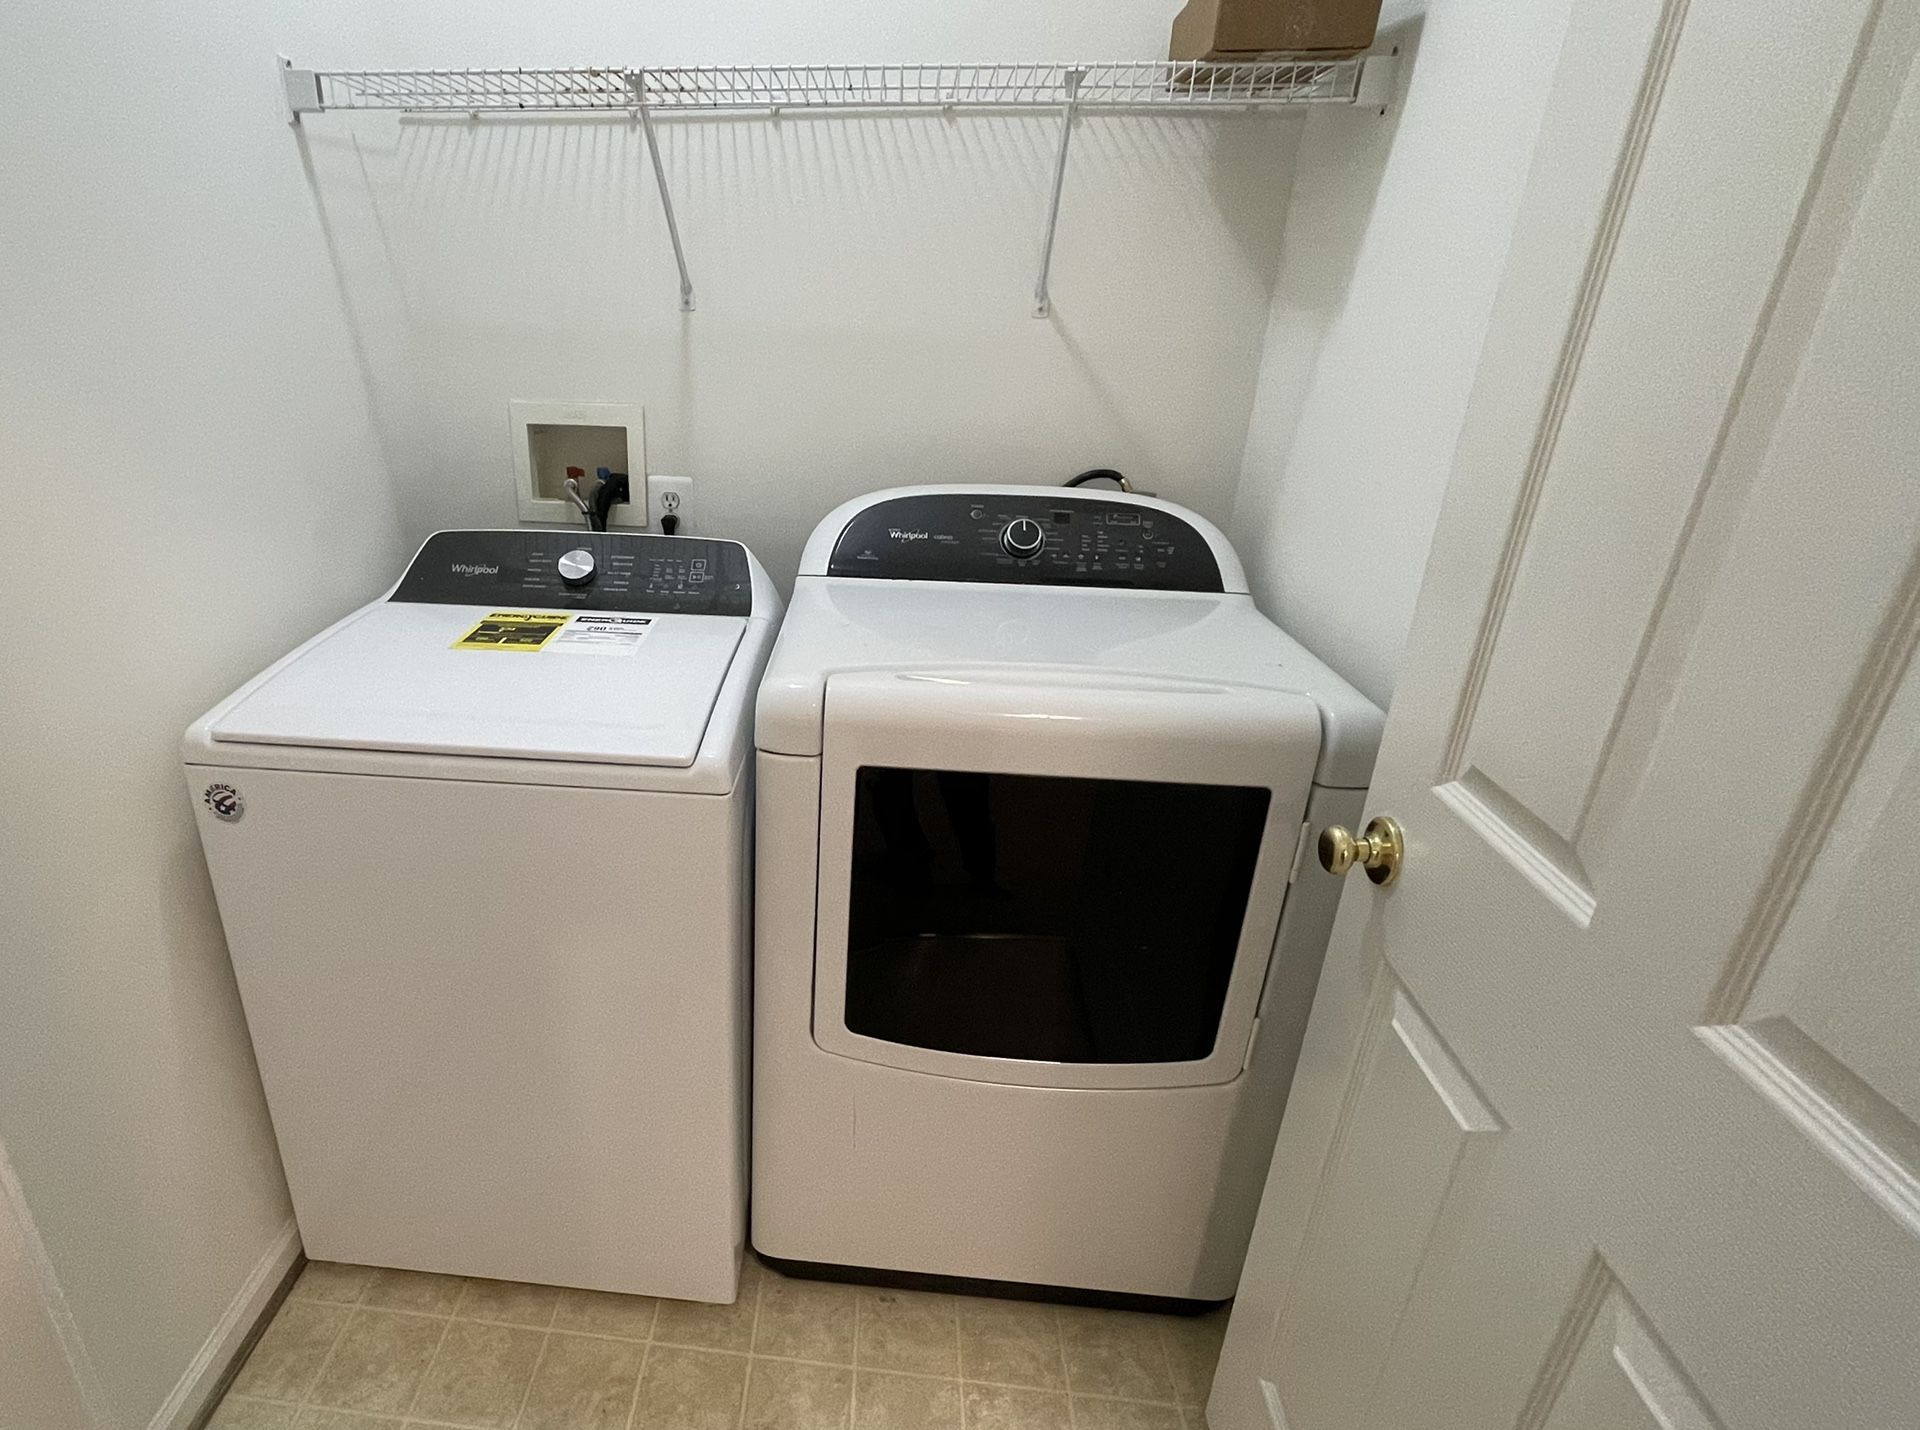   Whirlpool Washer & Dryer Set - Great Condition 